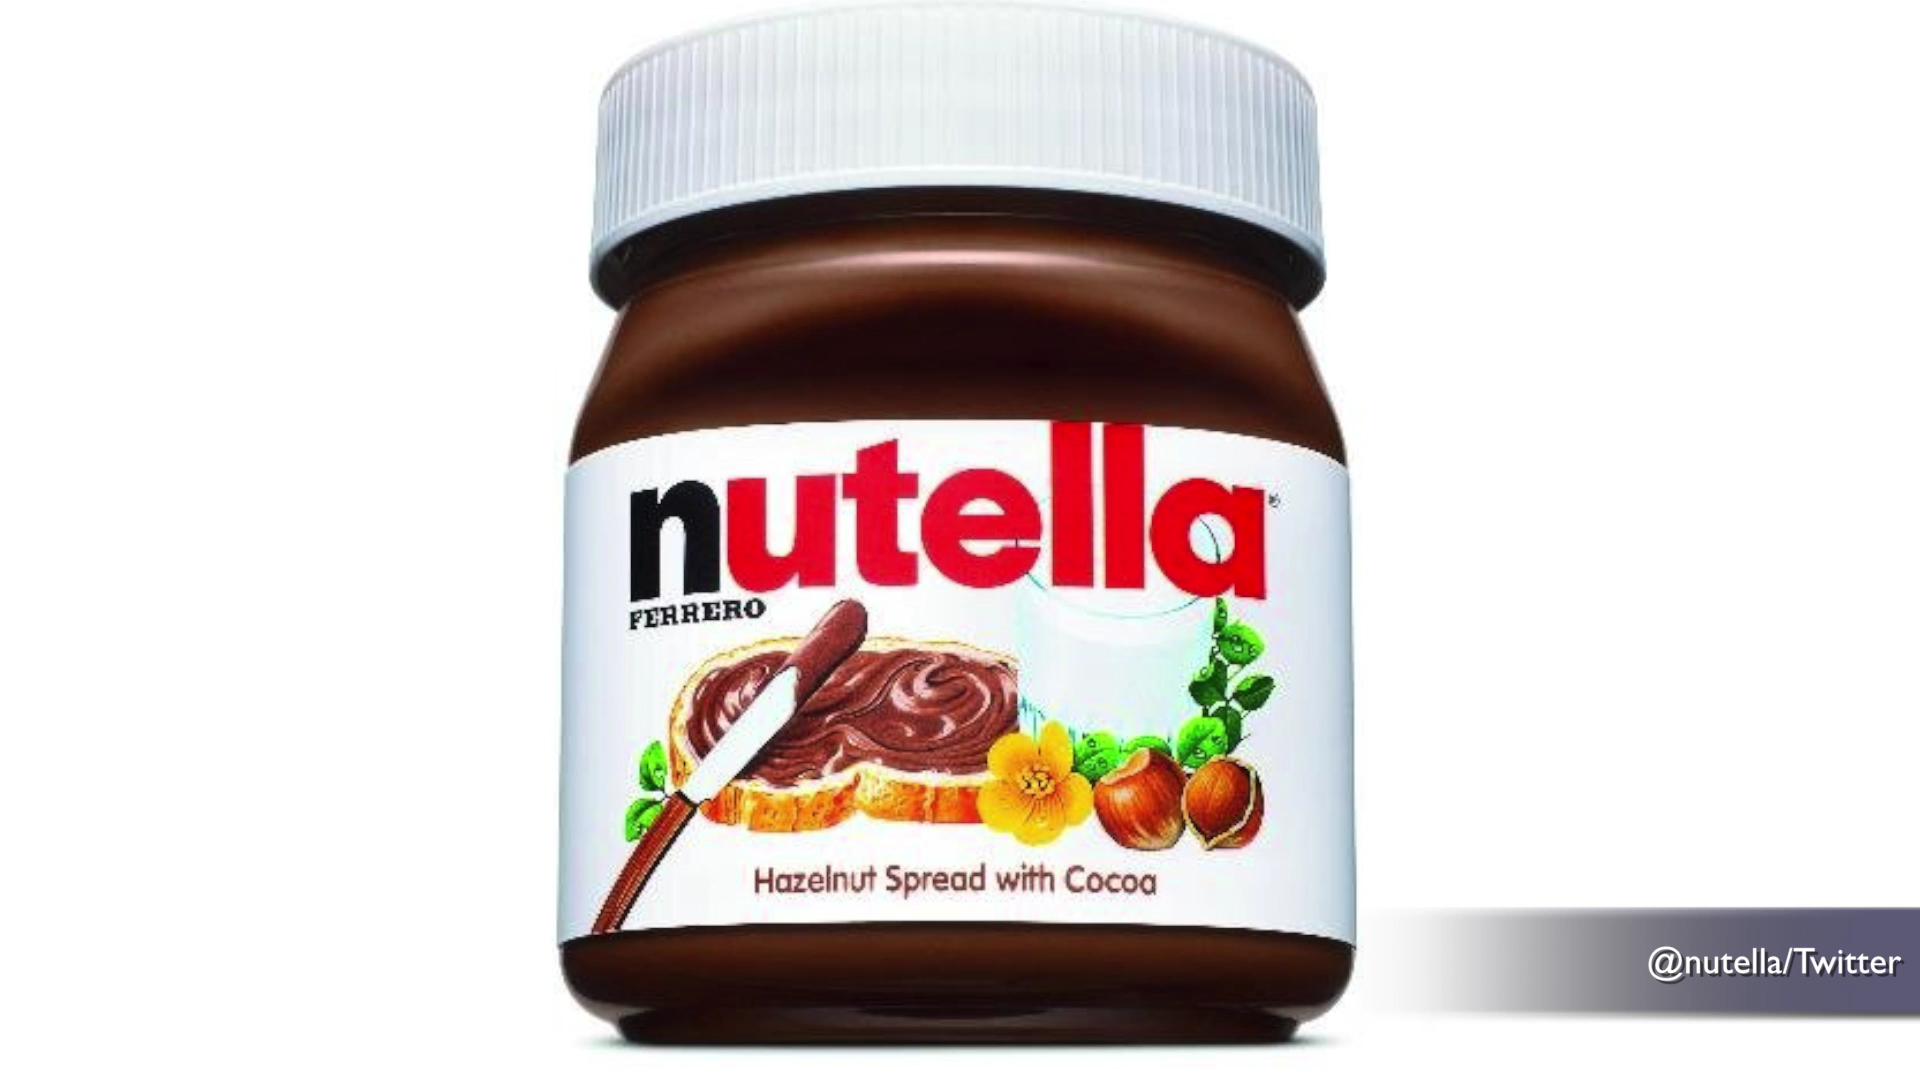 Costco shopper punches 78-year-old in face over Nutella samples